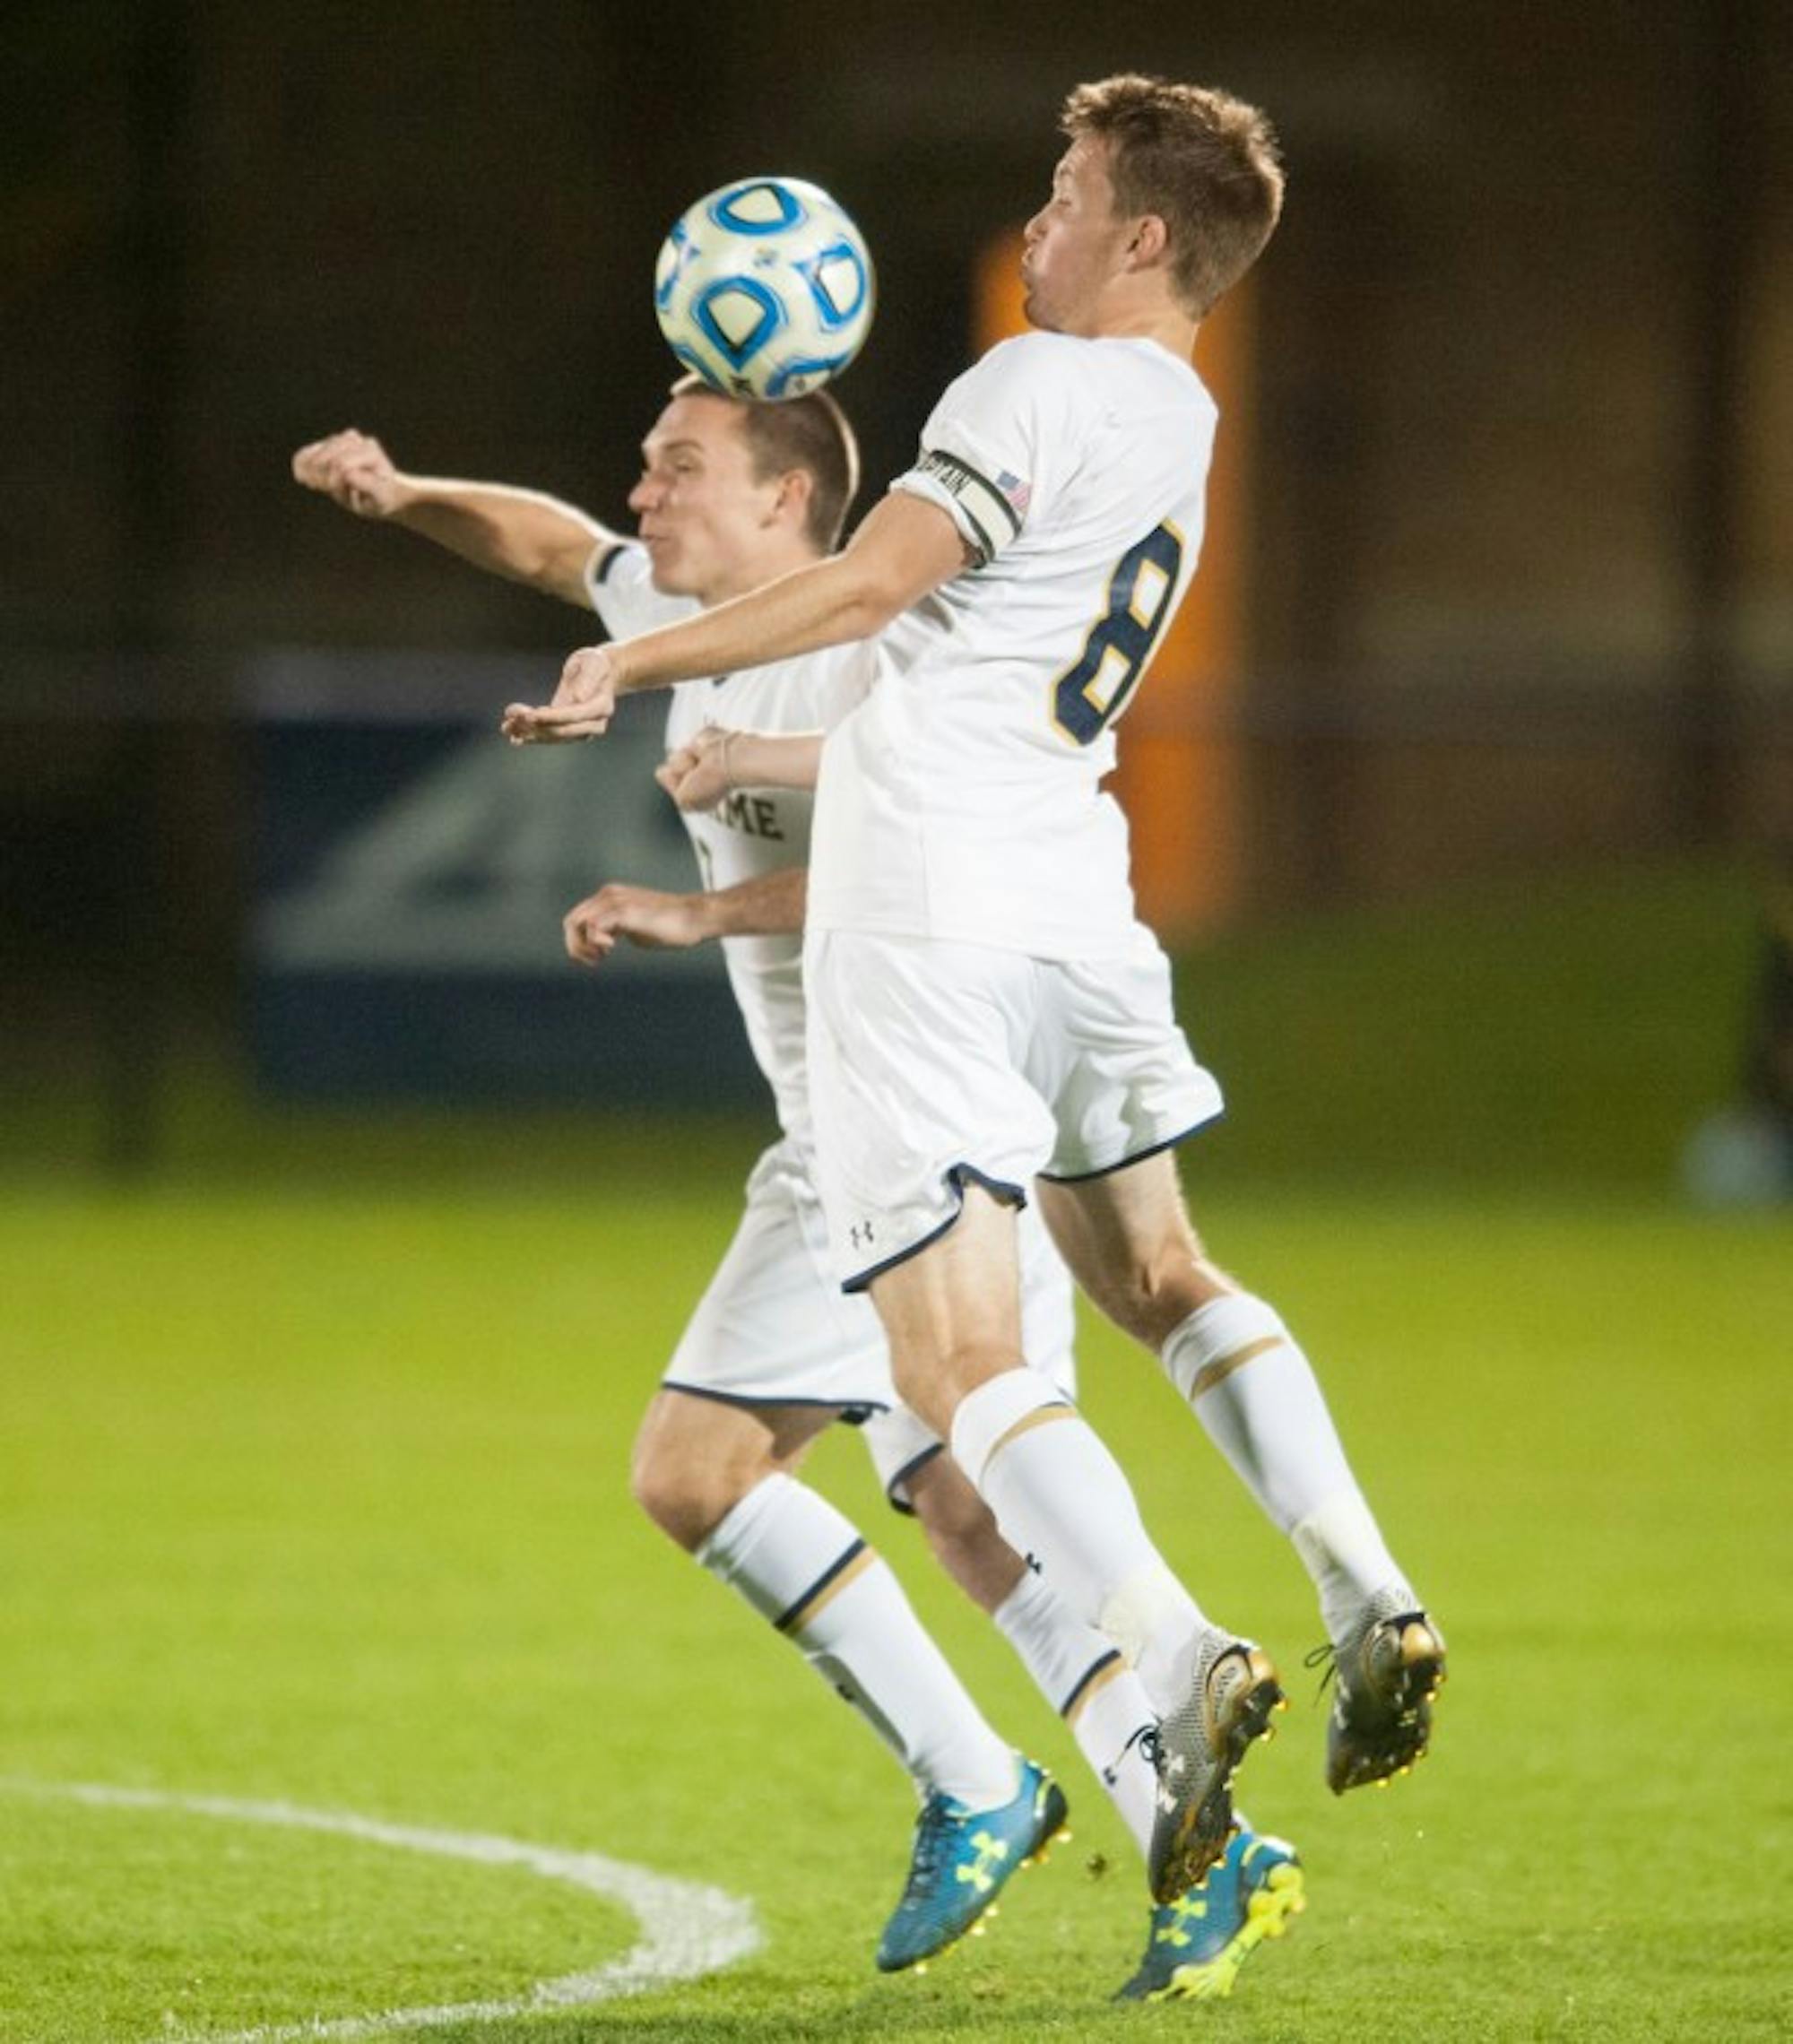 Irish senior midfielder and captain Nick Besler, right, goes up for a ball in the air during Notre Dame’s 1-0 win over VCU on Tuesday.